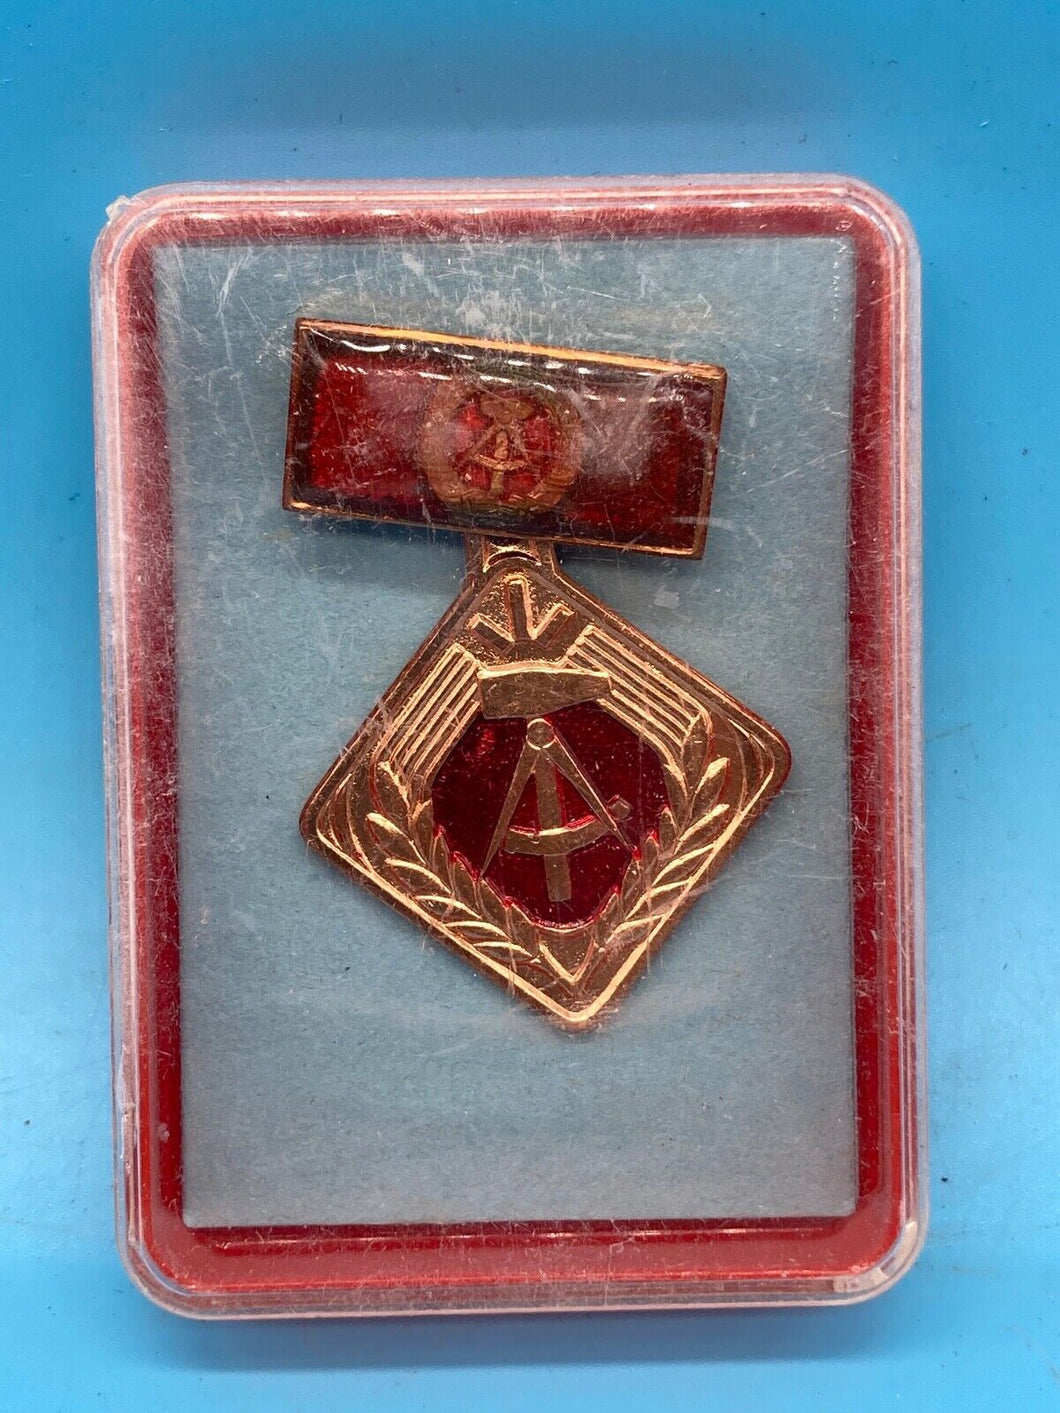 Genuine East German DDR Collective Socialist Work Labor Badge Red Box